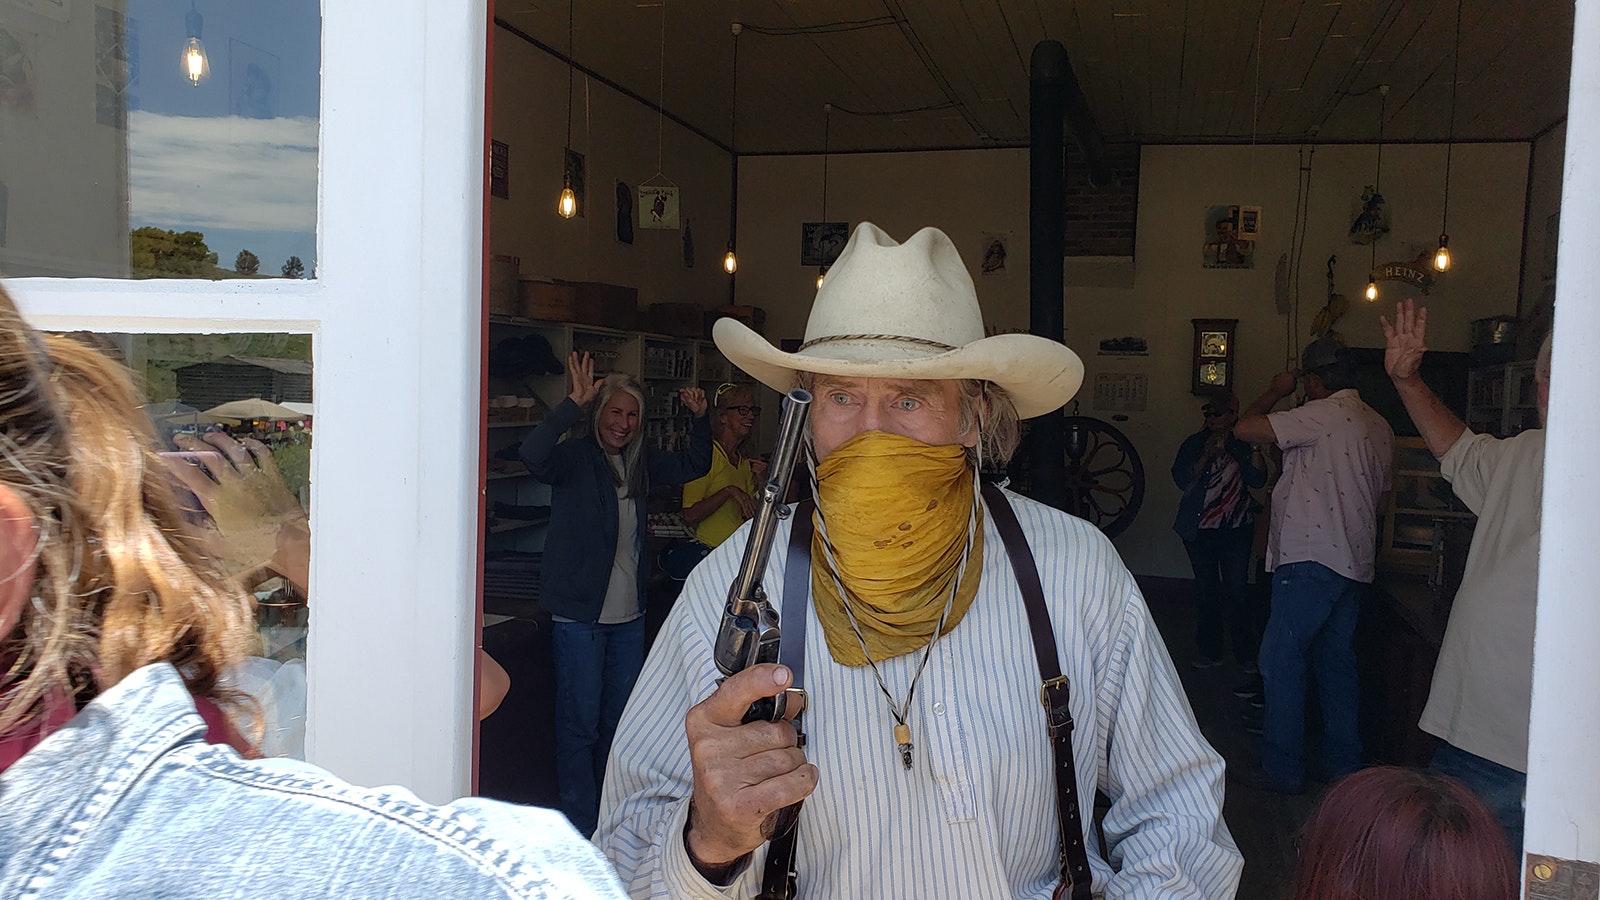 One of the bandits guards the door to keep the crowd away while another demands all the merchants money during Gold Rush Days at South Pass City.